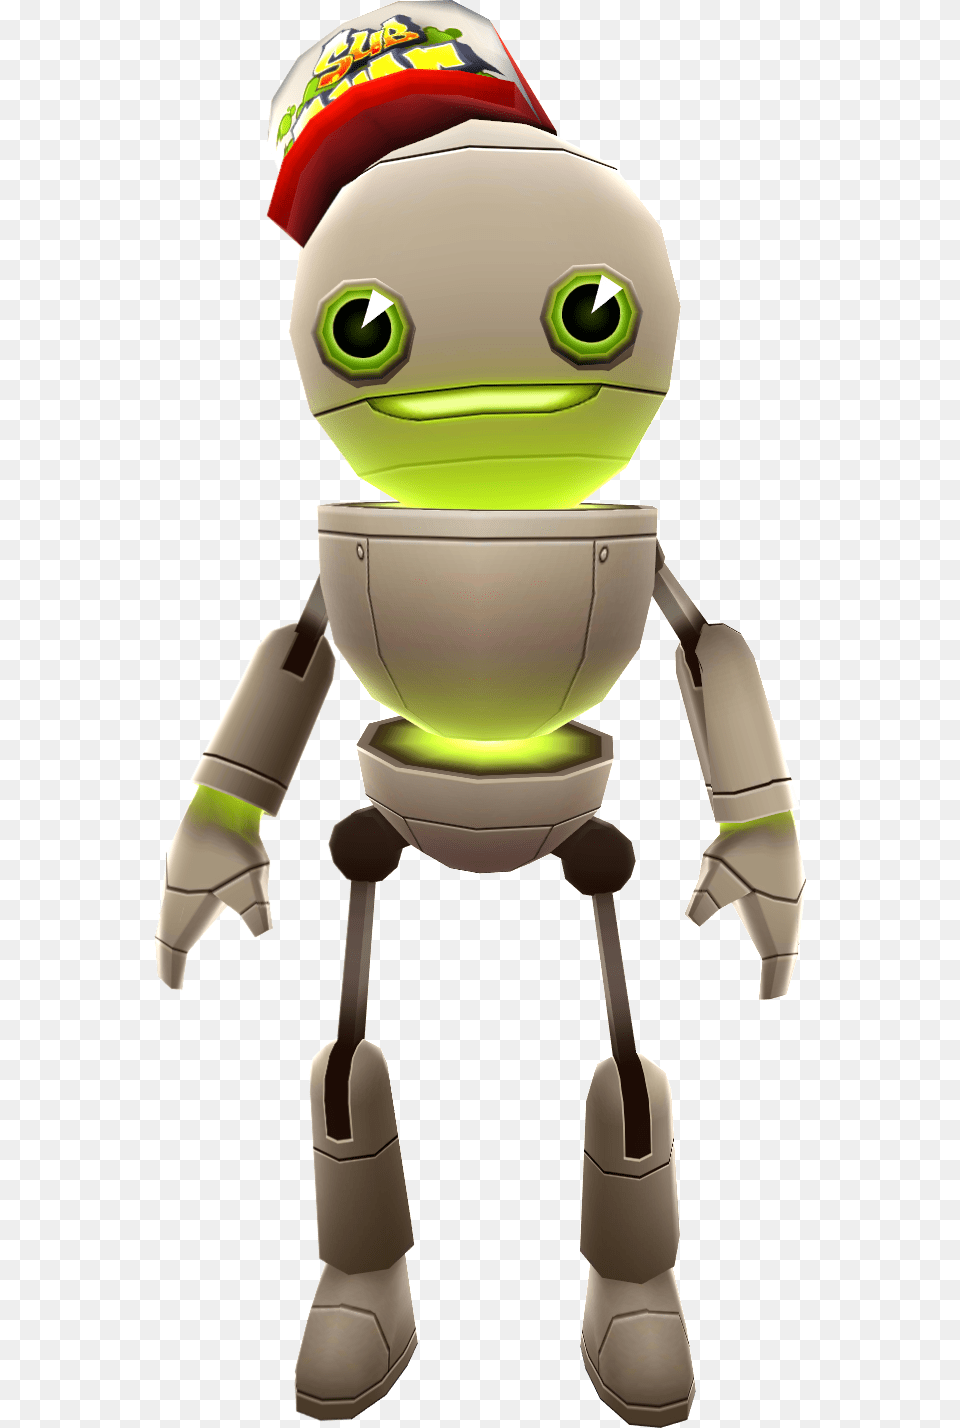 Tagbot Subway Surfers Subway Surfers Tagbot Space Outfit, Robot, Mace Club, Weapon, Baby Free Png Download